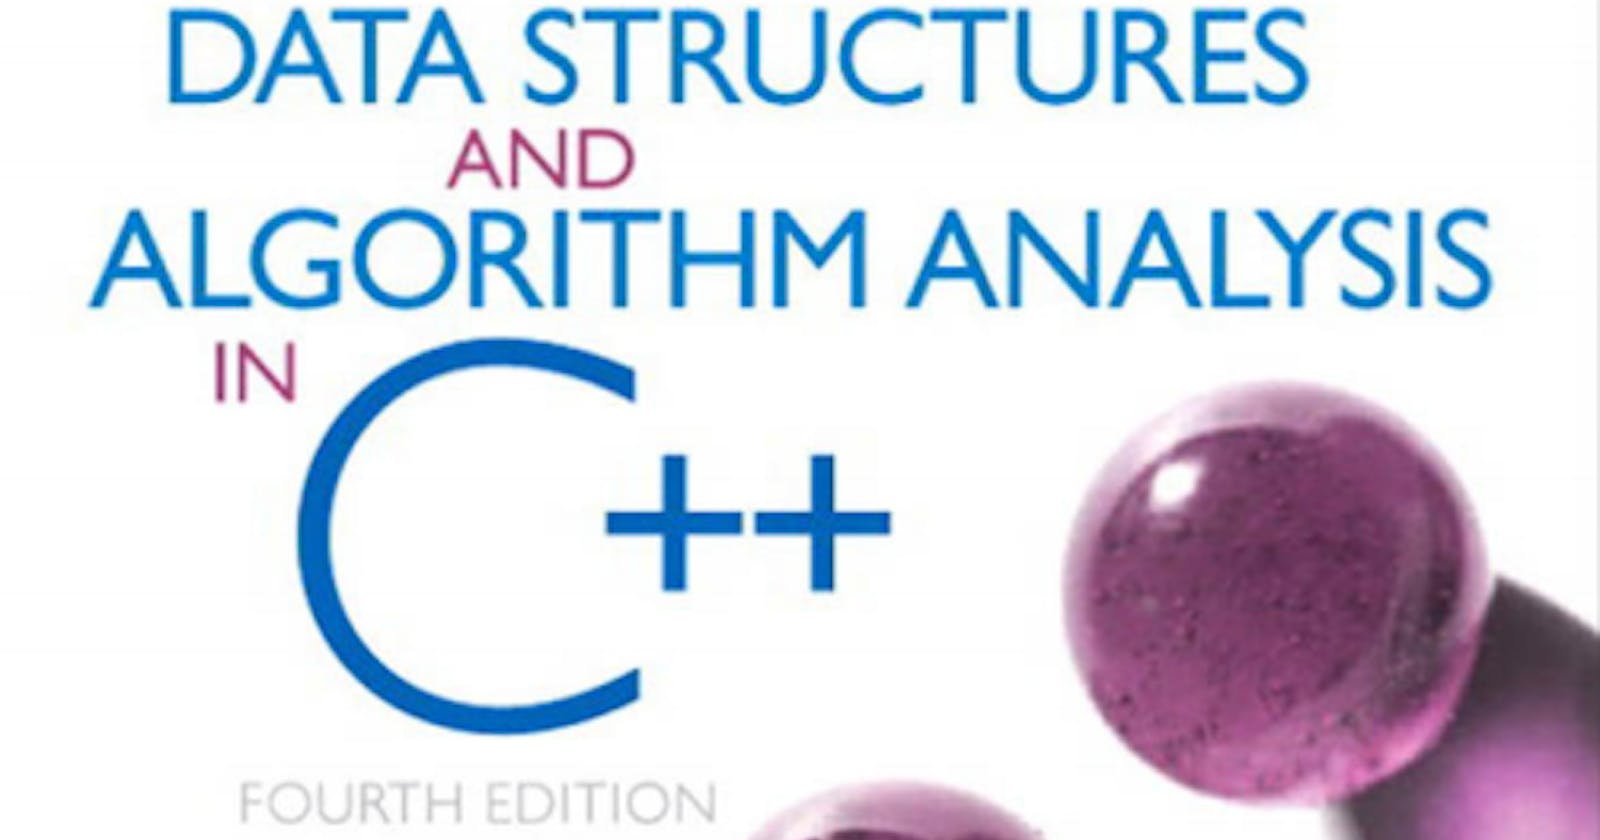 Data Structures and Algorithms Introduction